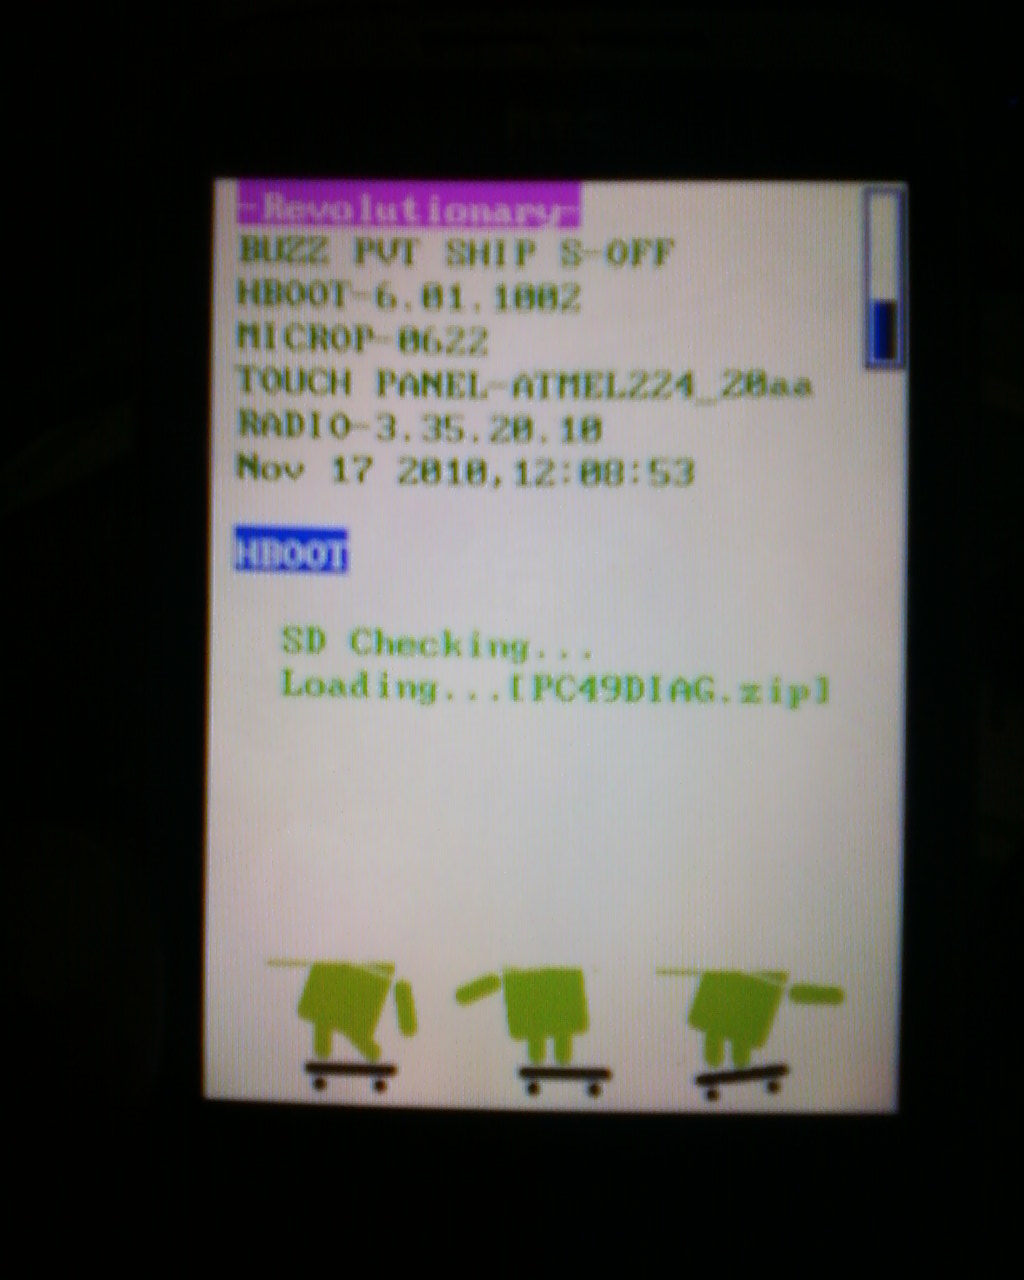  :=  HTC WILDFIRE HBOOT 1.01.0002